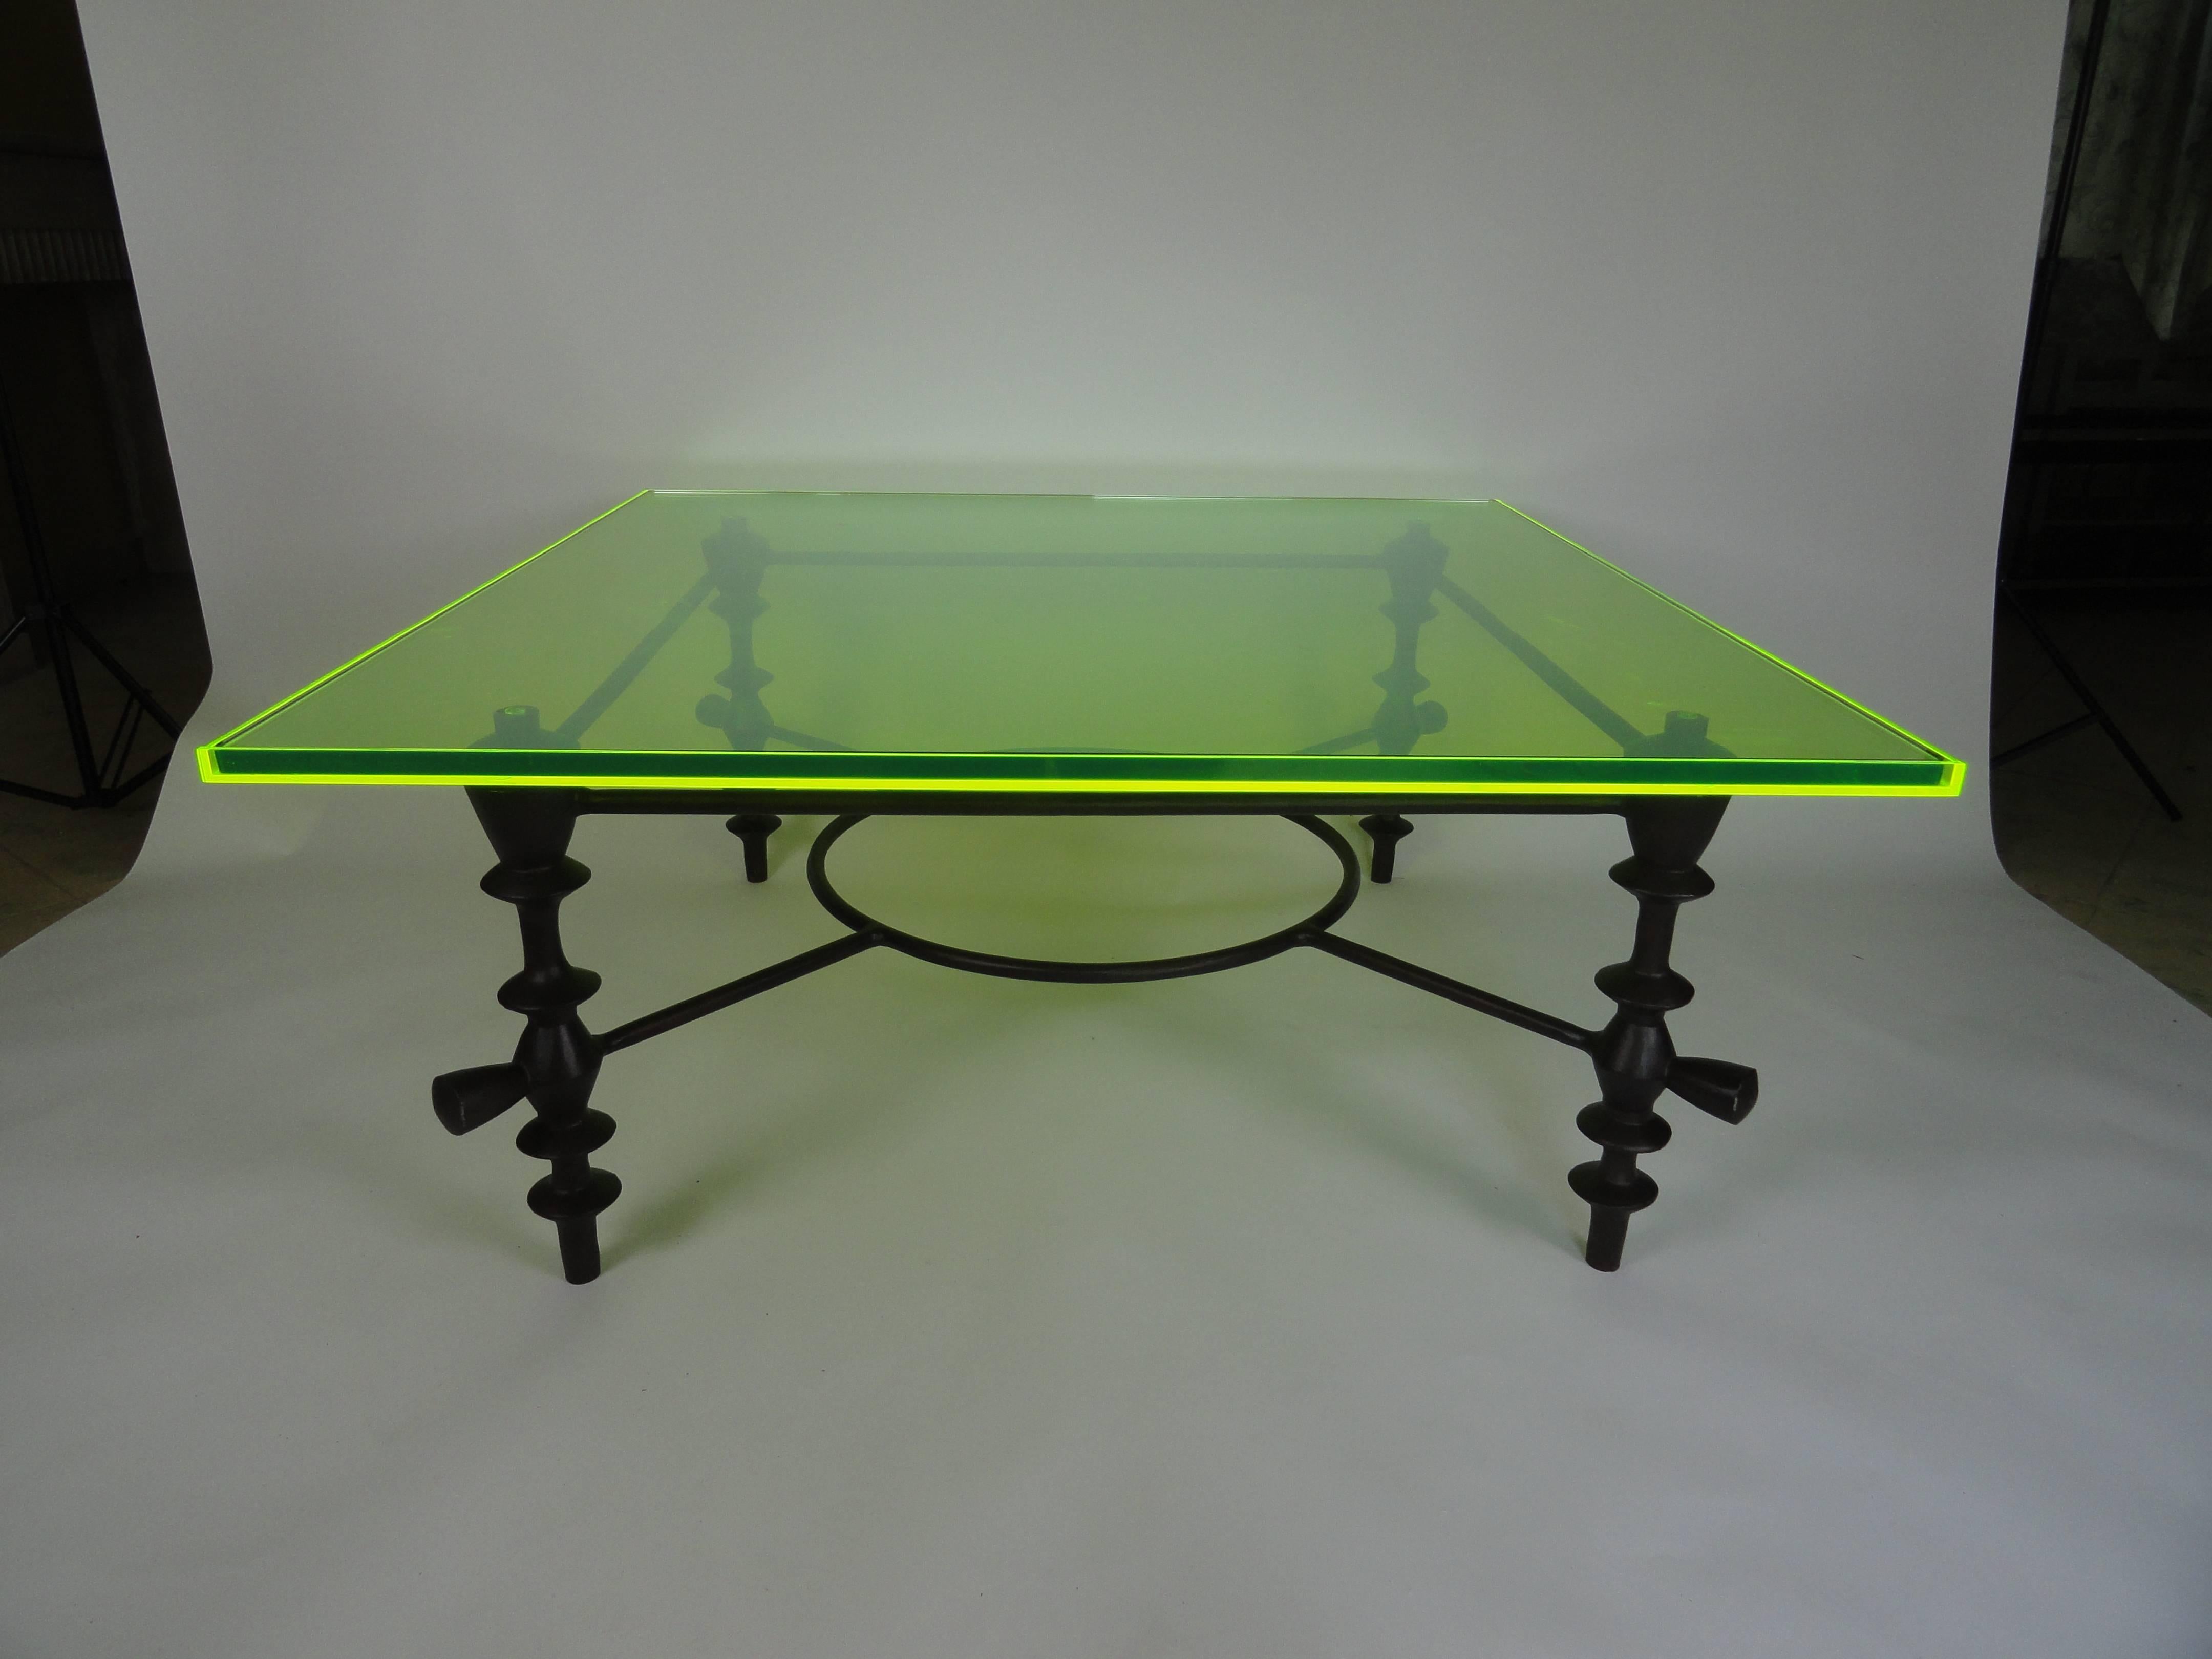 Giacometti style coffee table made of metal with a custom green acrylic top. The edges of the top absorb and refract any light which makes them appear to glow bright green. You can see it even with dim light. The acrylic tray top holds a thick piece